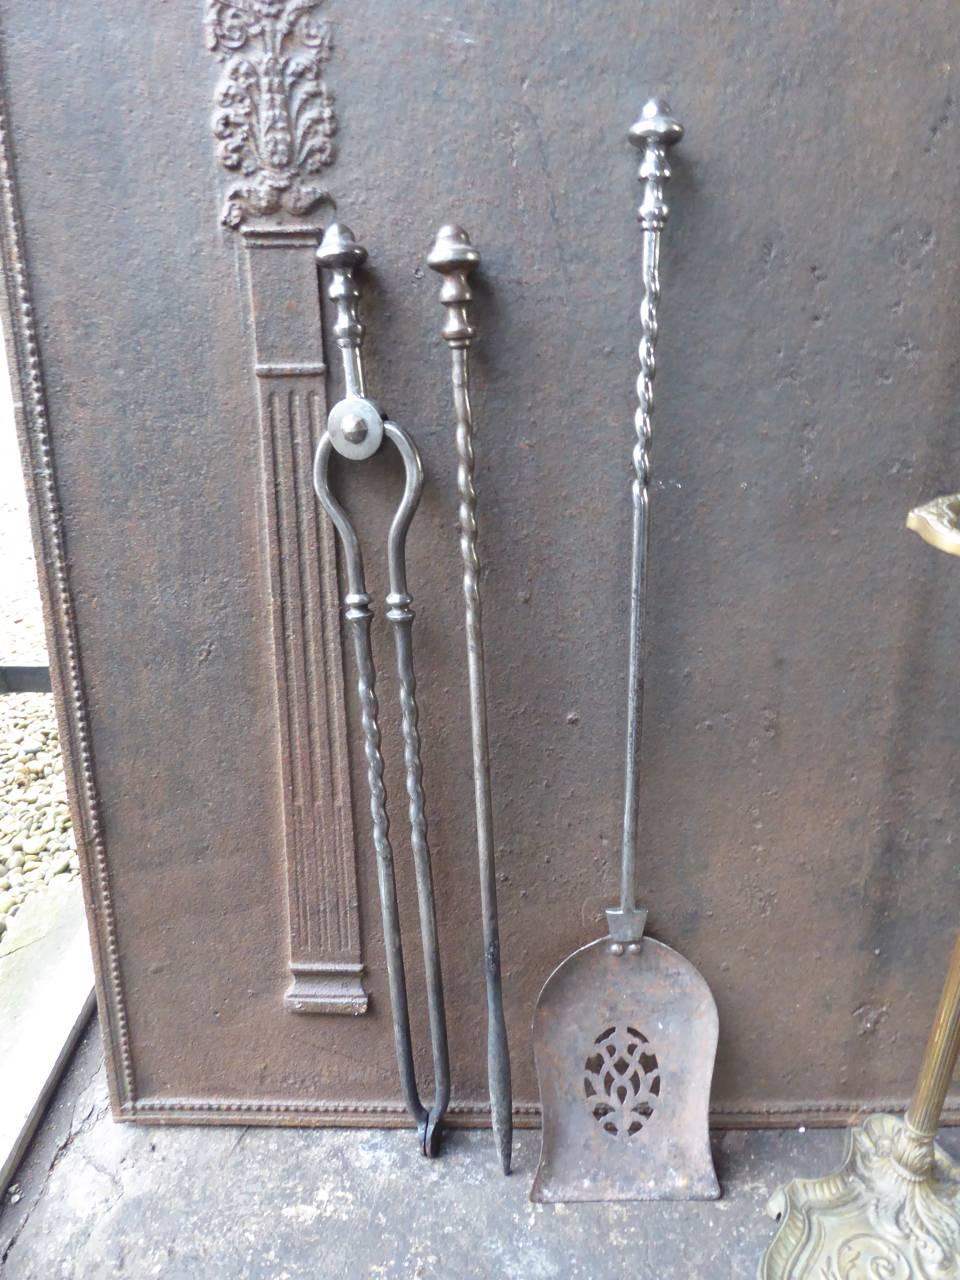 19th century English fire irons fireplace tools made of polished steel and brass.

We have a unique and specialized collection of antique and used fireplace accessories consisting of more than 1000 listings at 1stdibs. Amongst others we always have